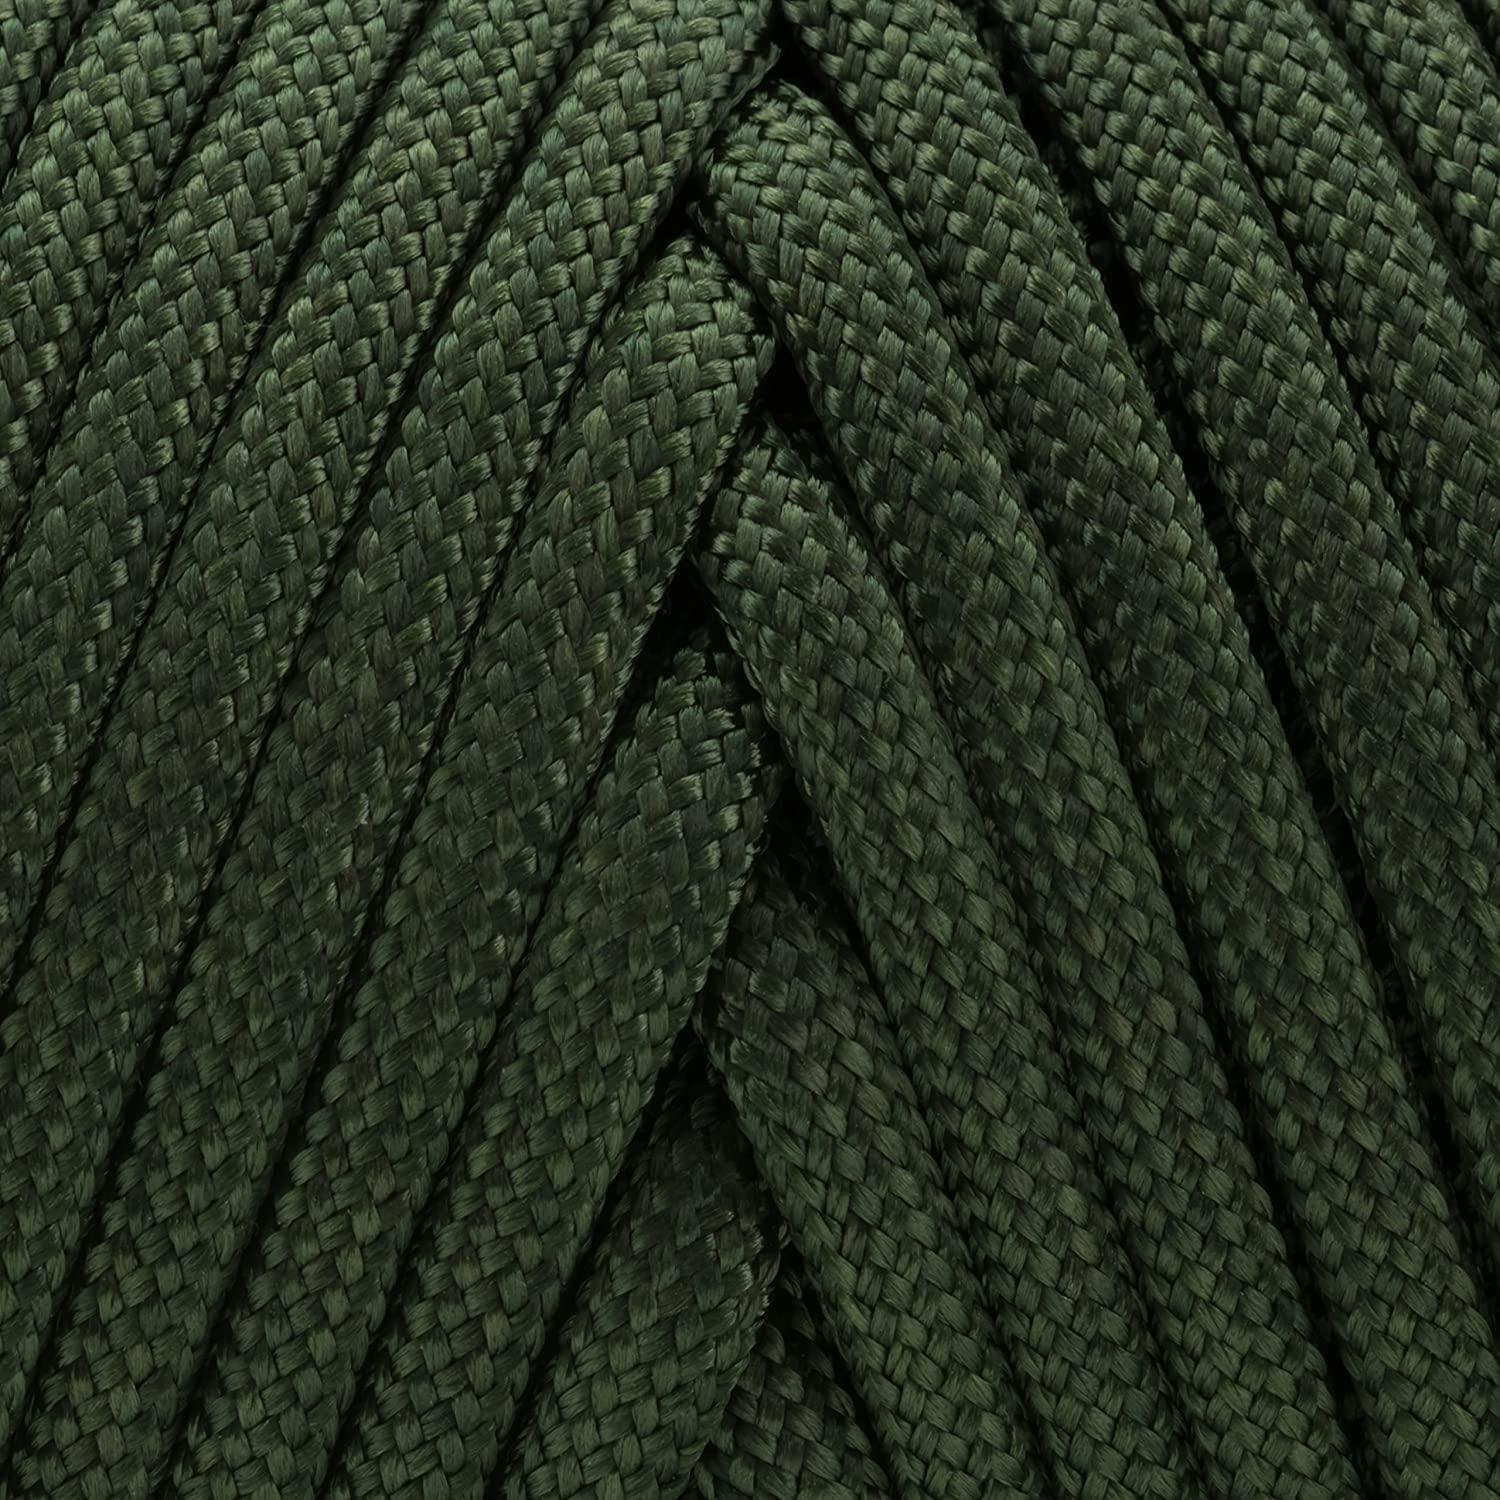 Paracord Planet Tan - 1/8 inch Shock Cord